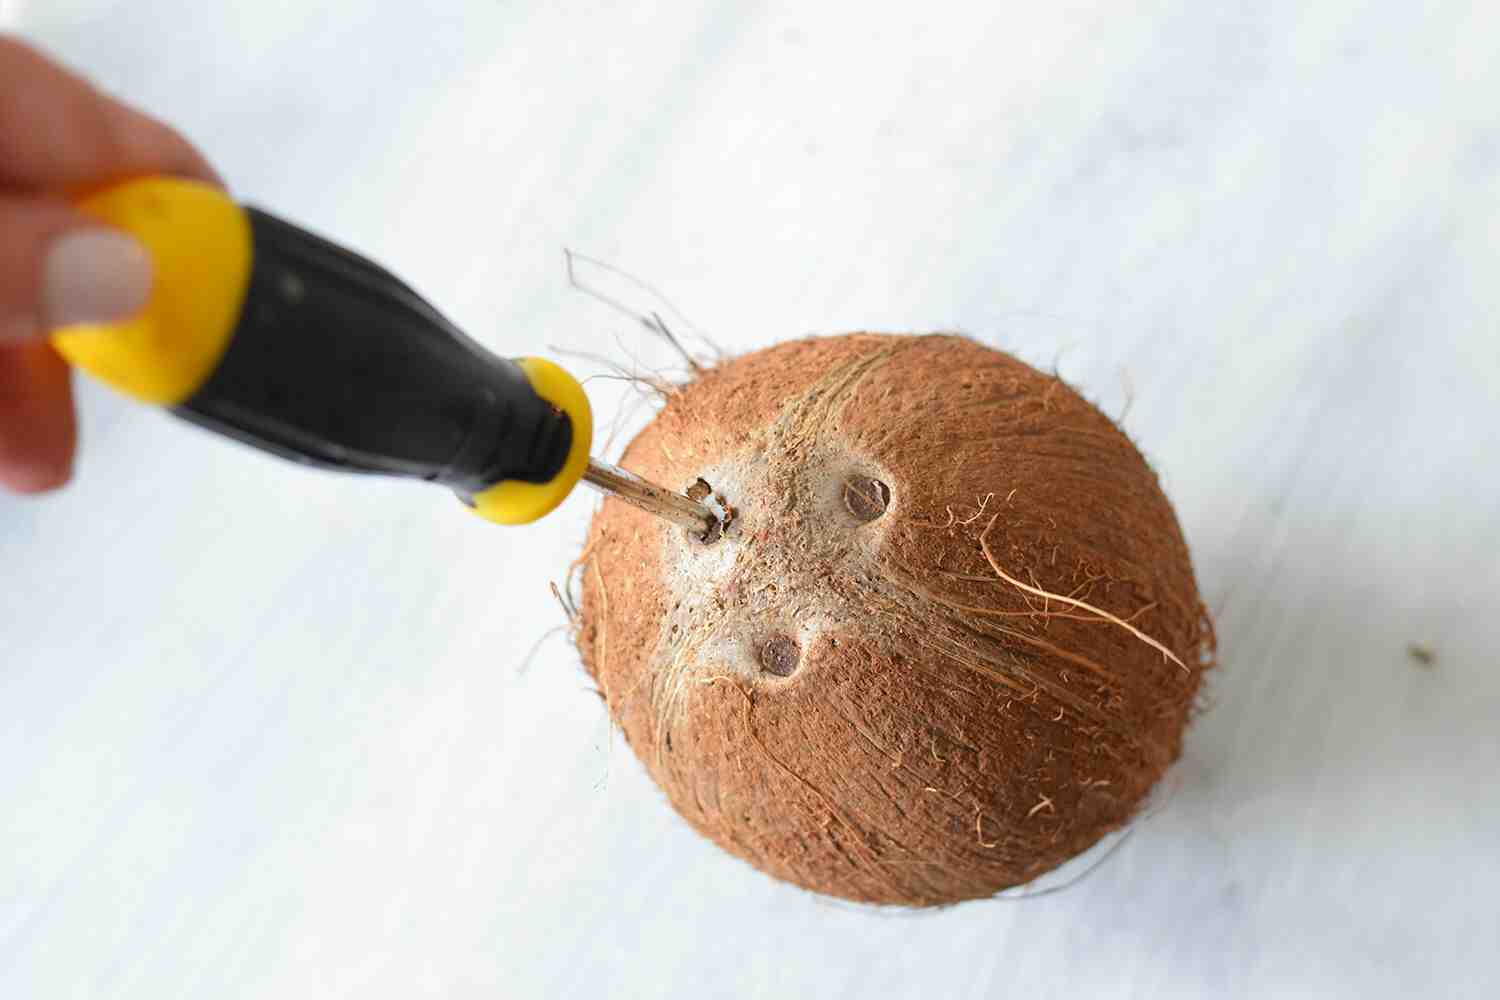 How do you poke a hole in a coconut?